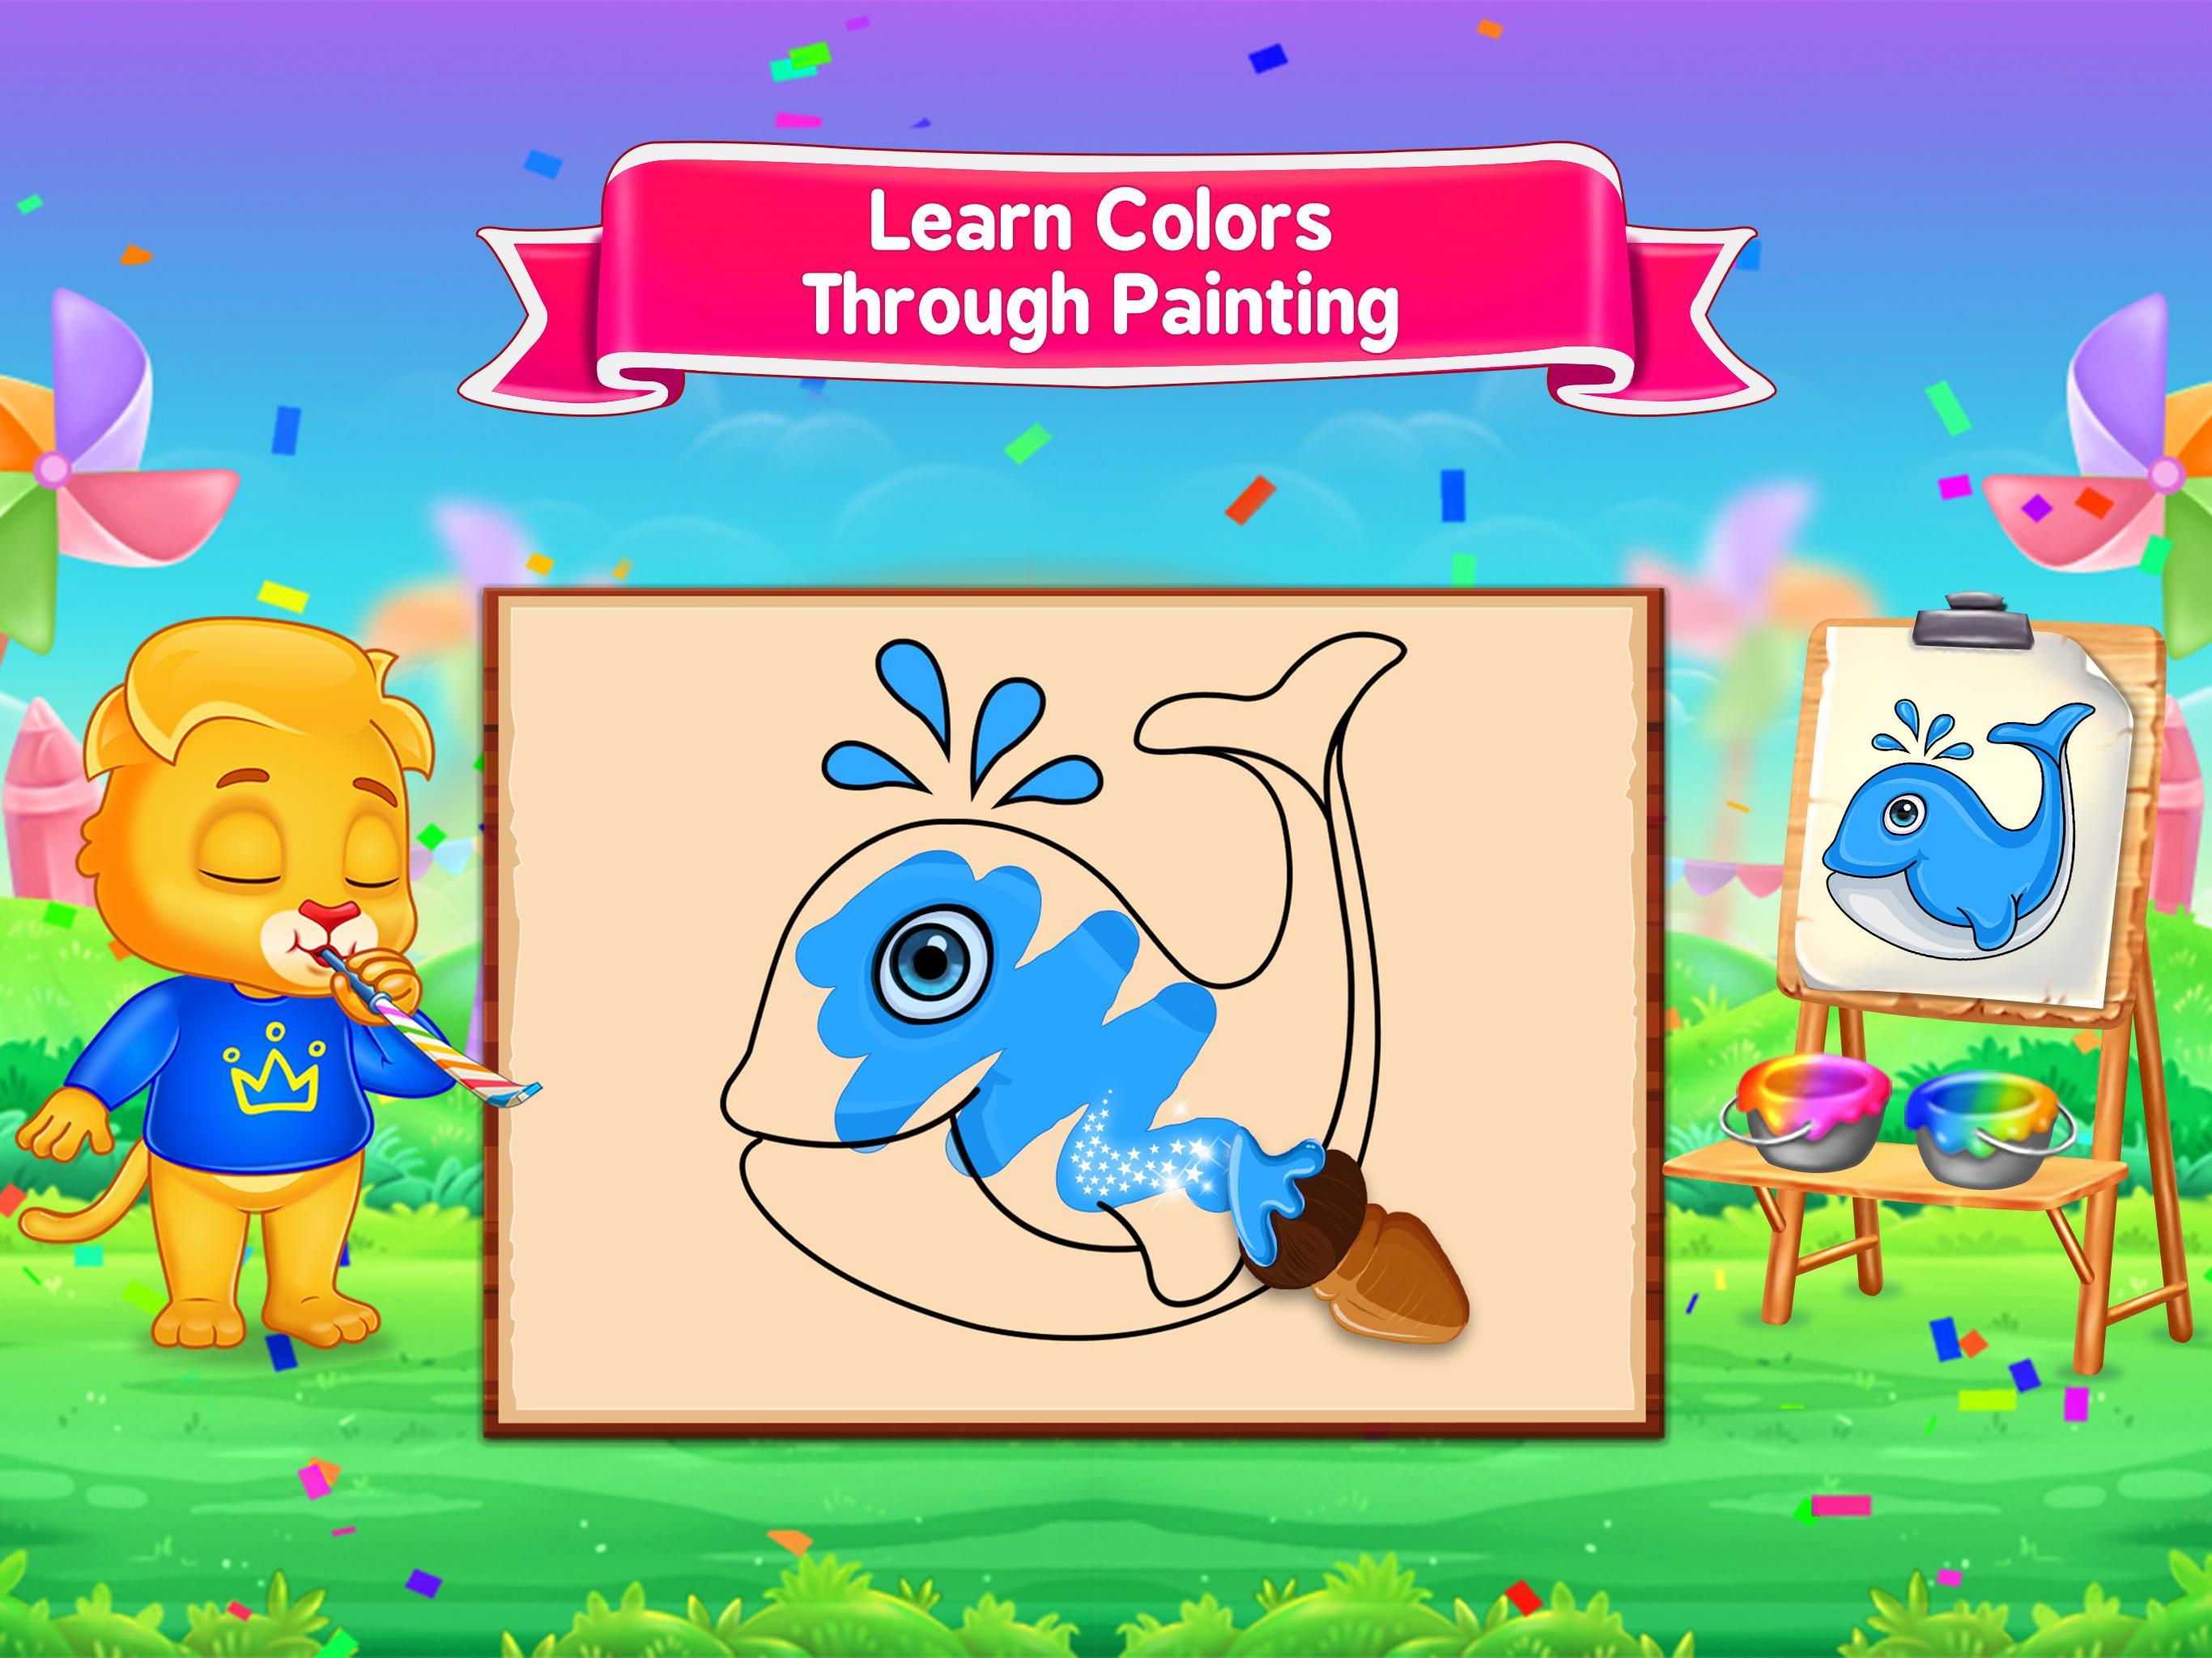 Colors & Shapes - Kids Learn Color and Shape 1.2.5 Screenshot 11